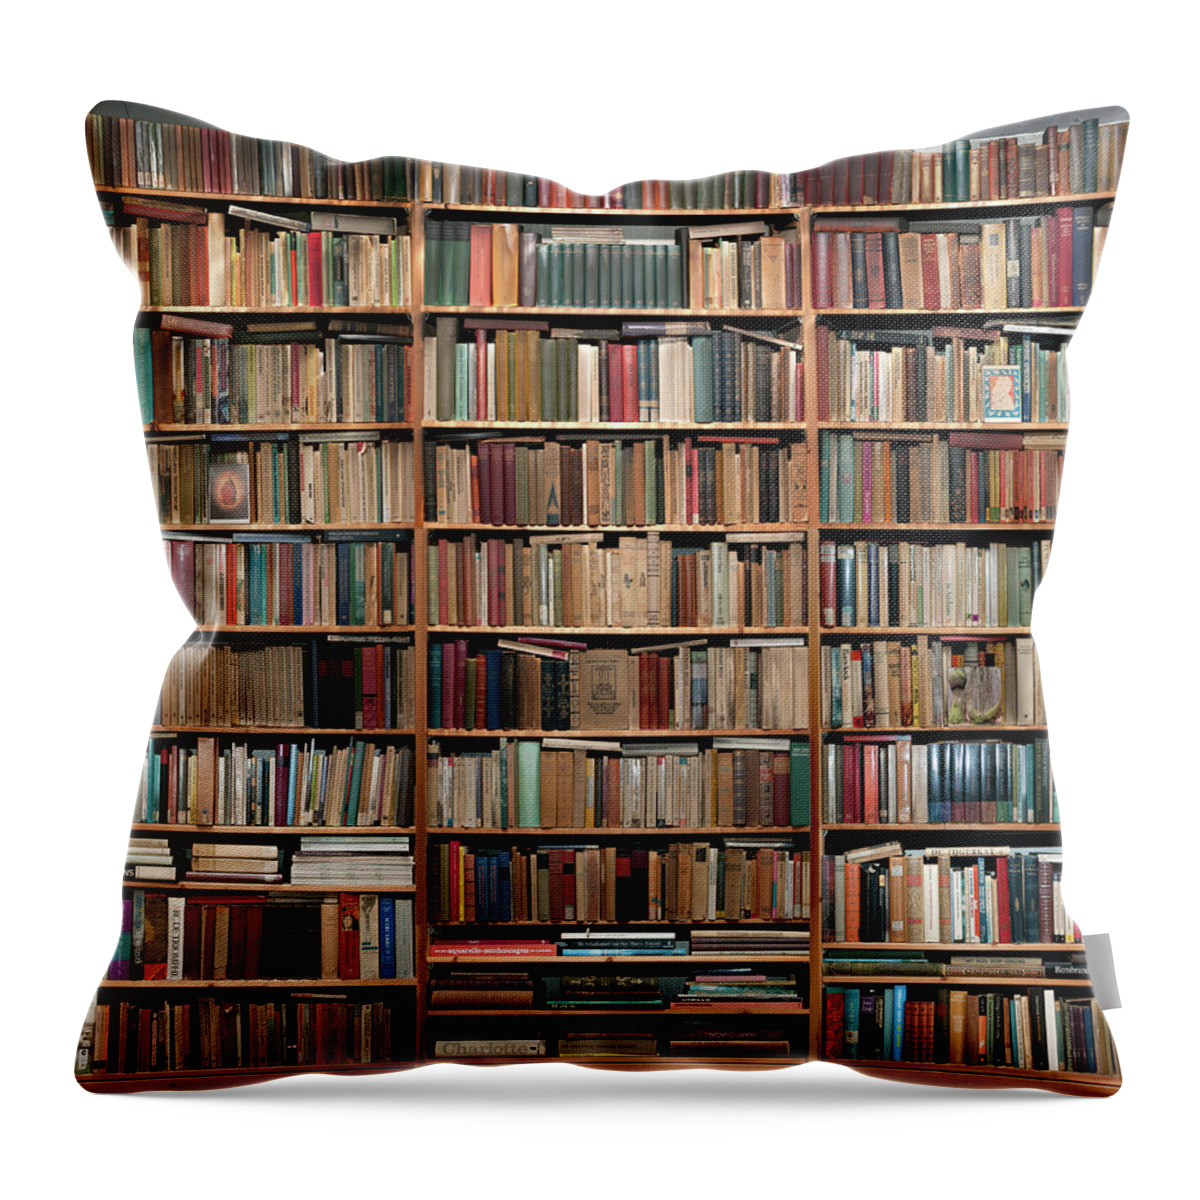 Netherlands Throw Pillow featuring the photograph Books by Image By Monique Van Der Lint